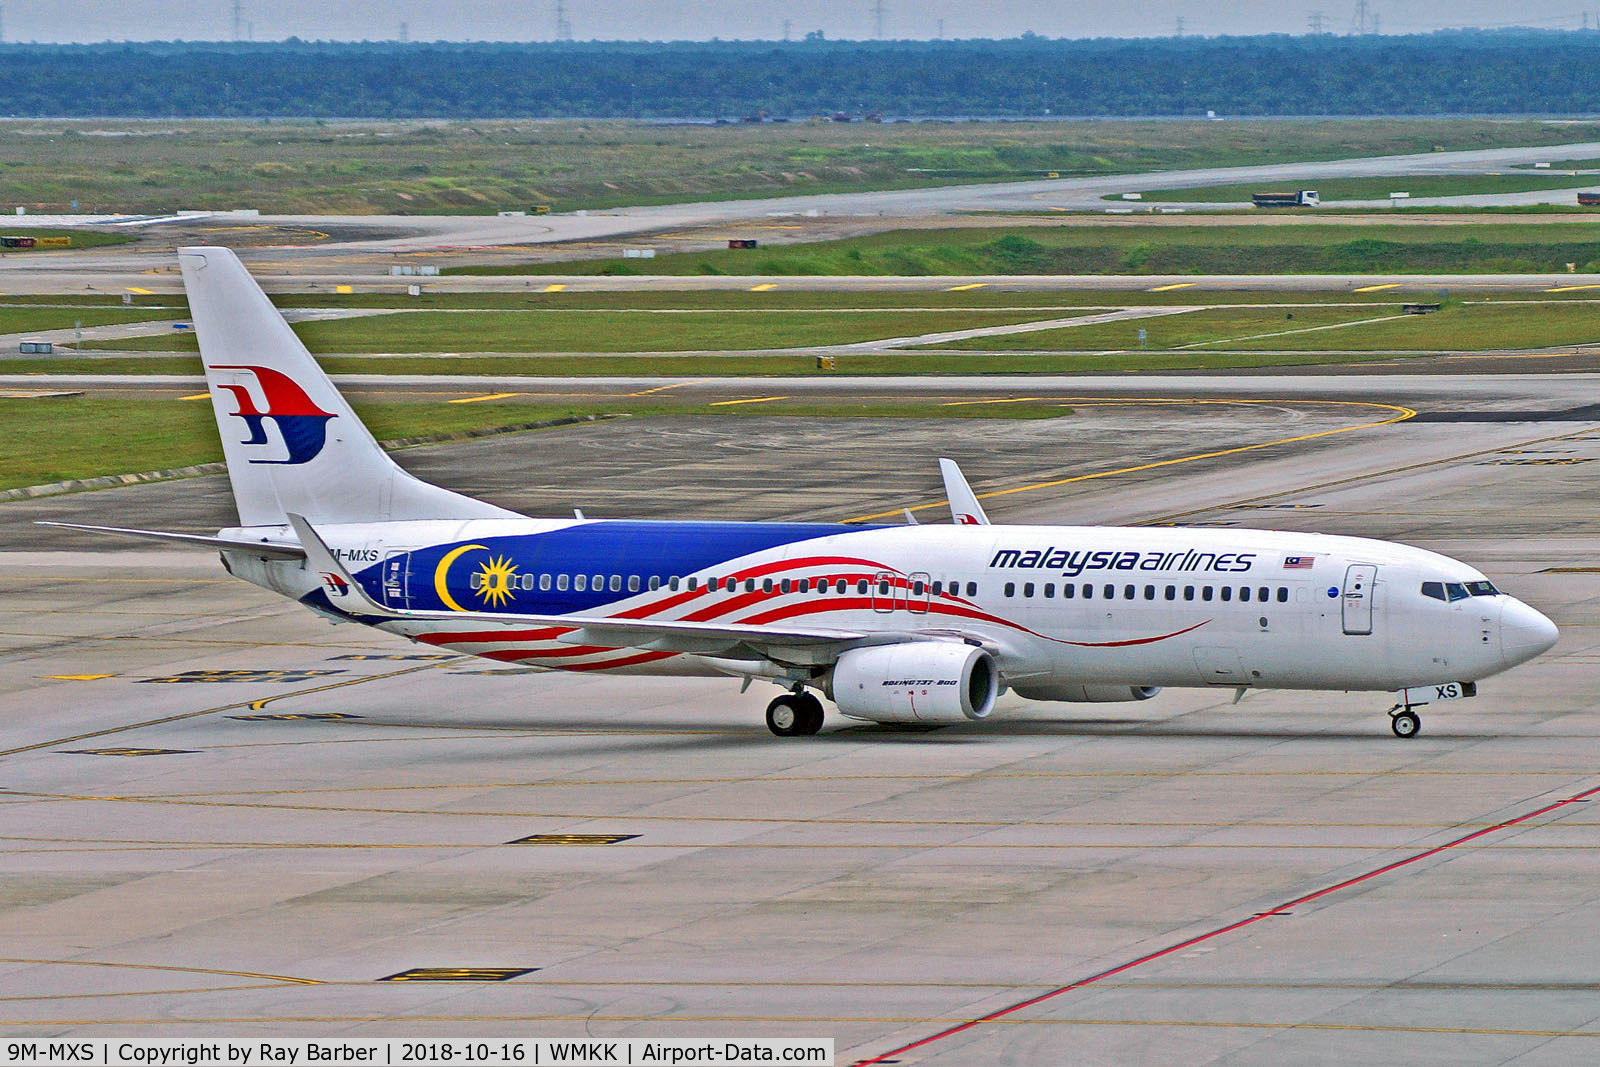 9M-MXS, 2014 Boeing 737-8H6 C/N 40156, 9M-MXS   Boeing 737-8H6 [40156] (Malaysia Airlines) Kuala Lumpur-Int'l (Sepang)~9M 16/10/2018